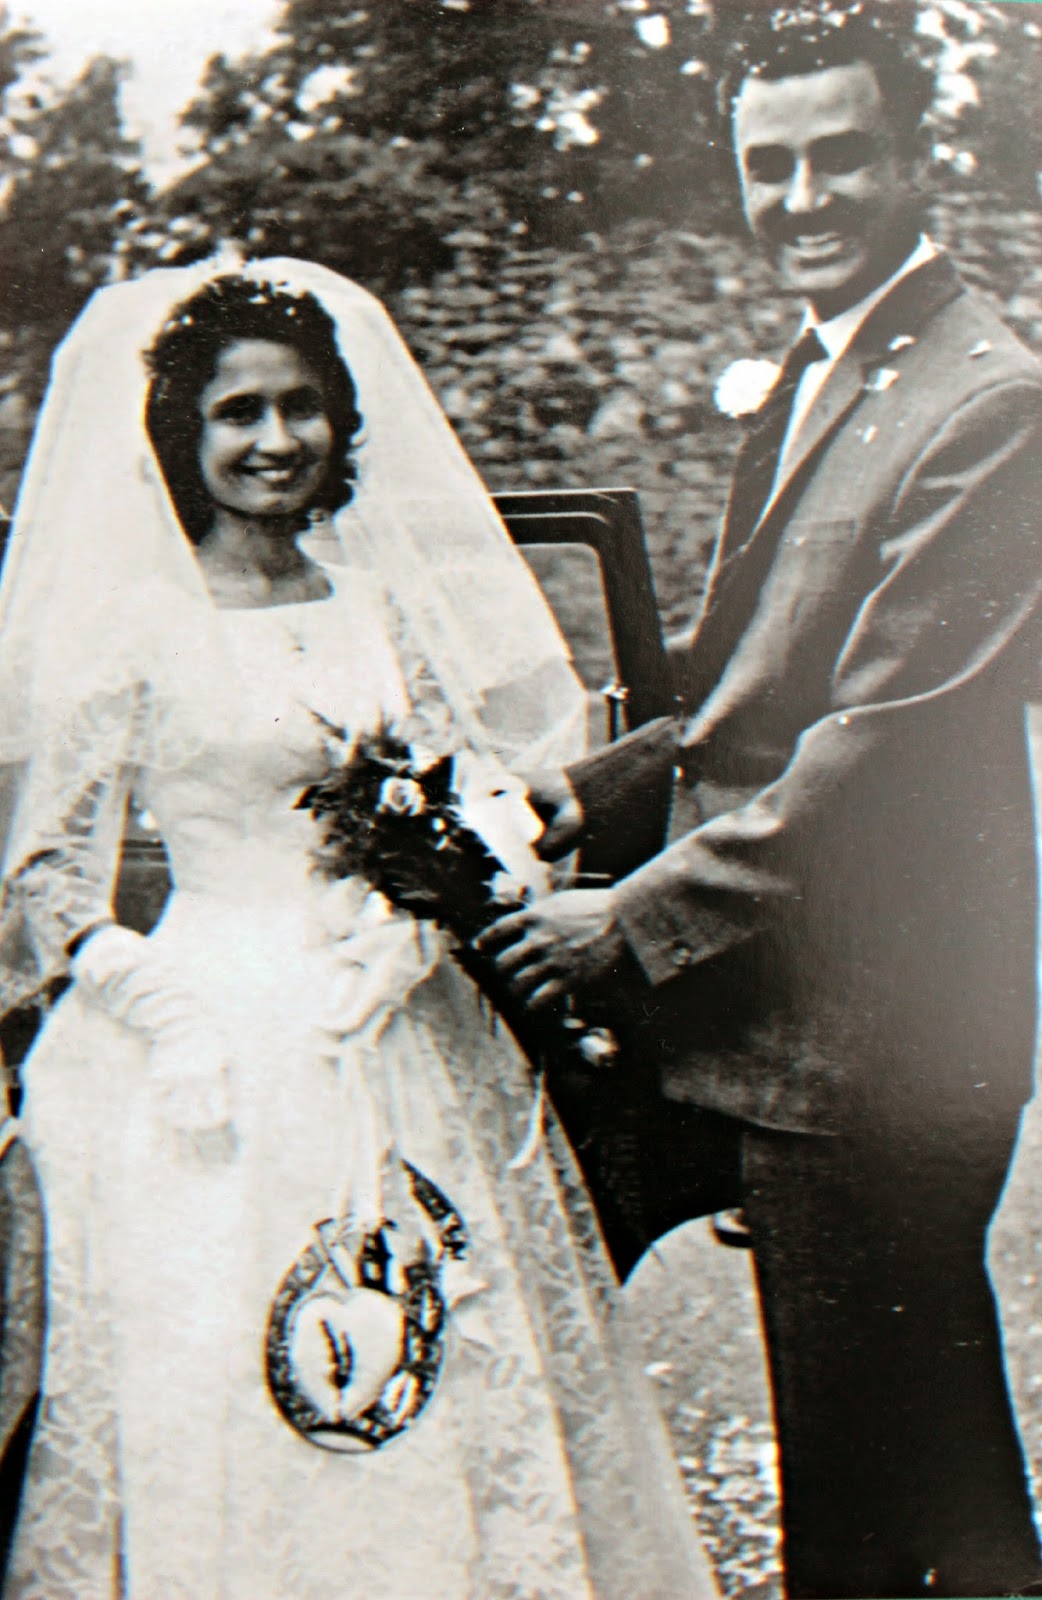 A picture of mum and dad's wedding day